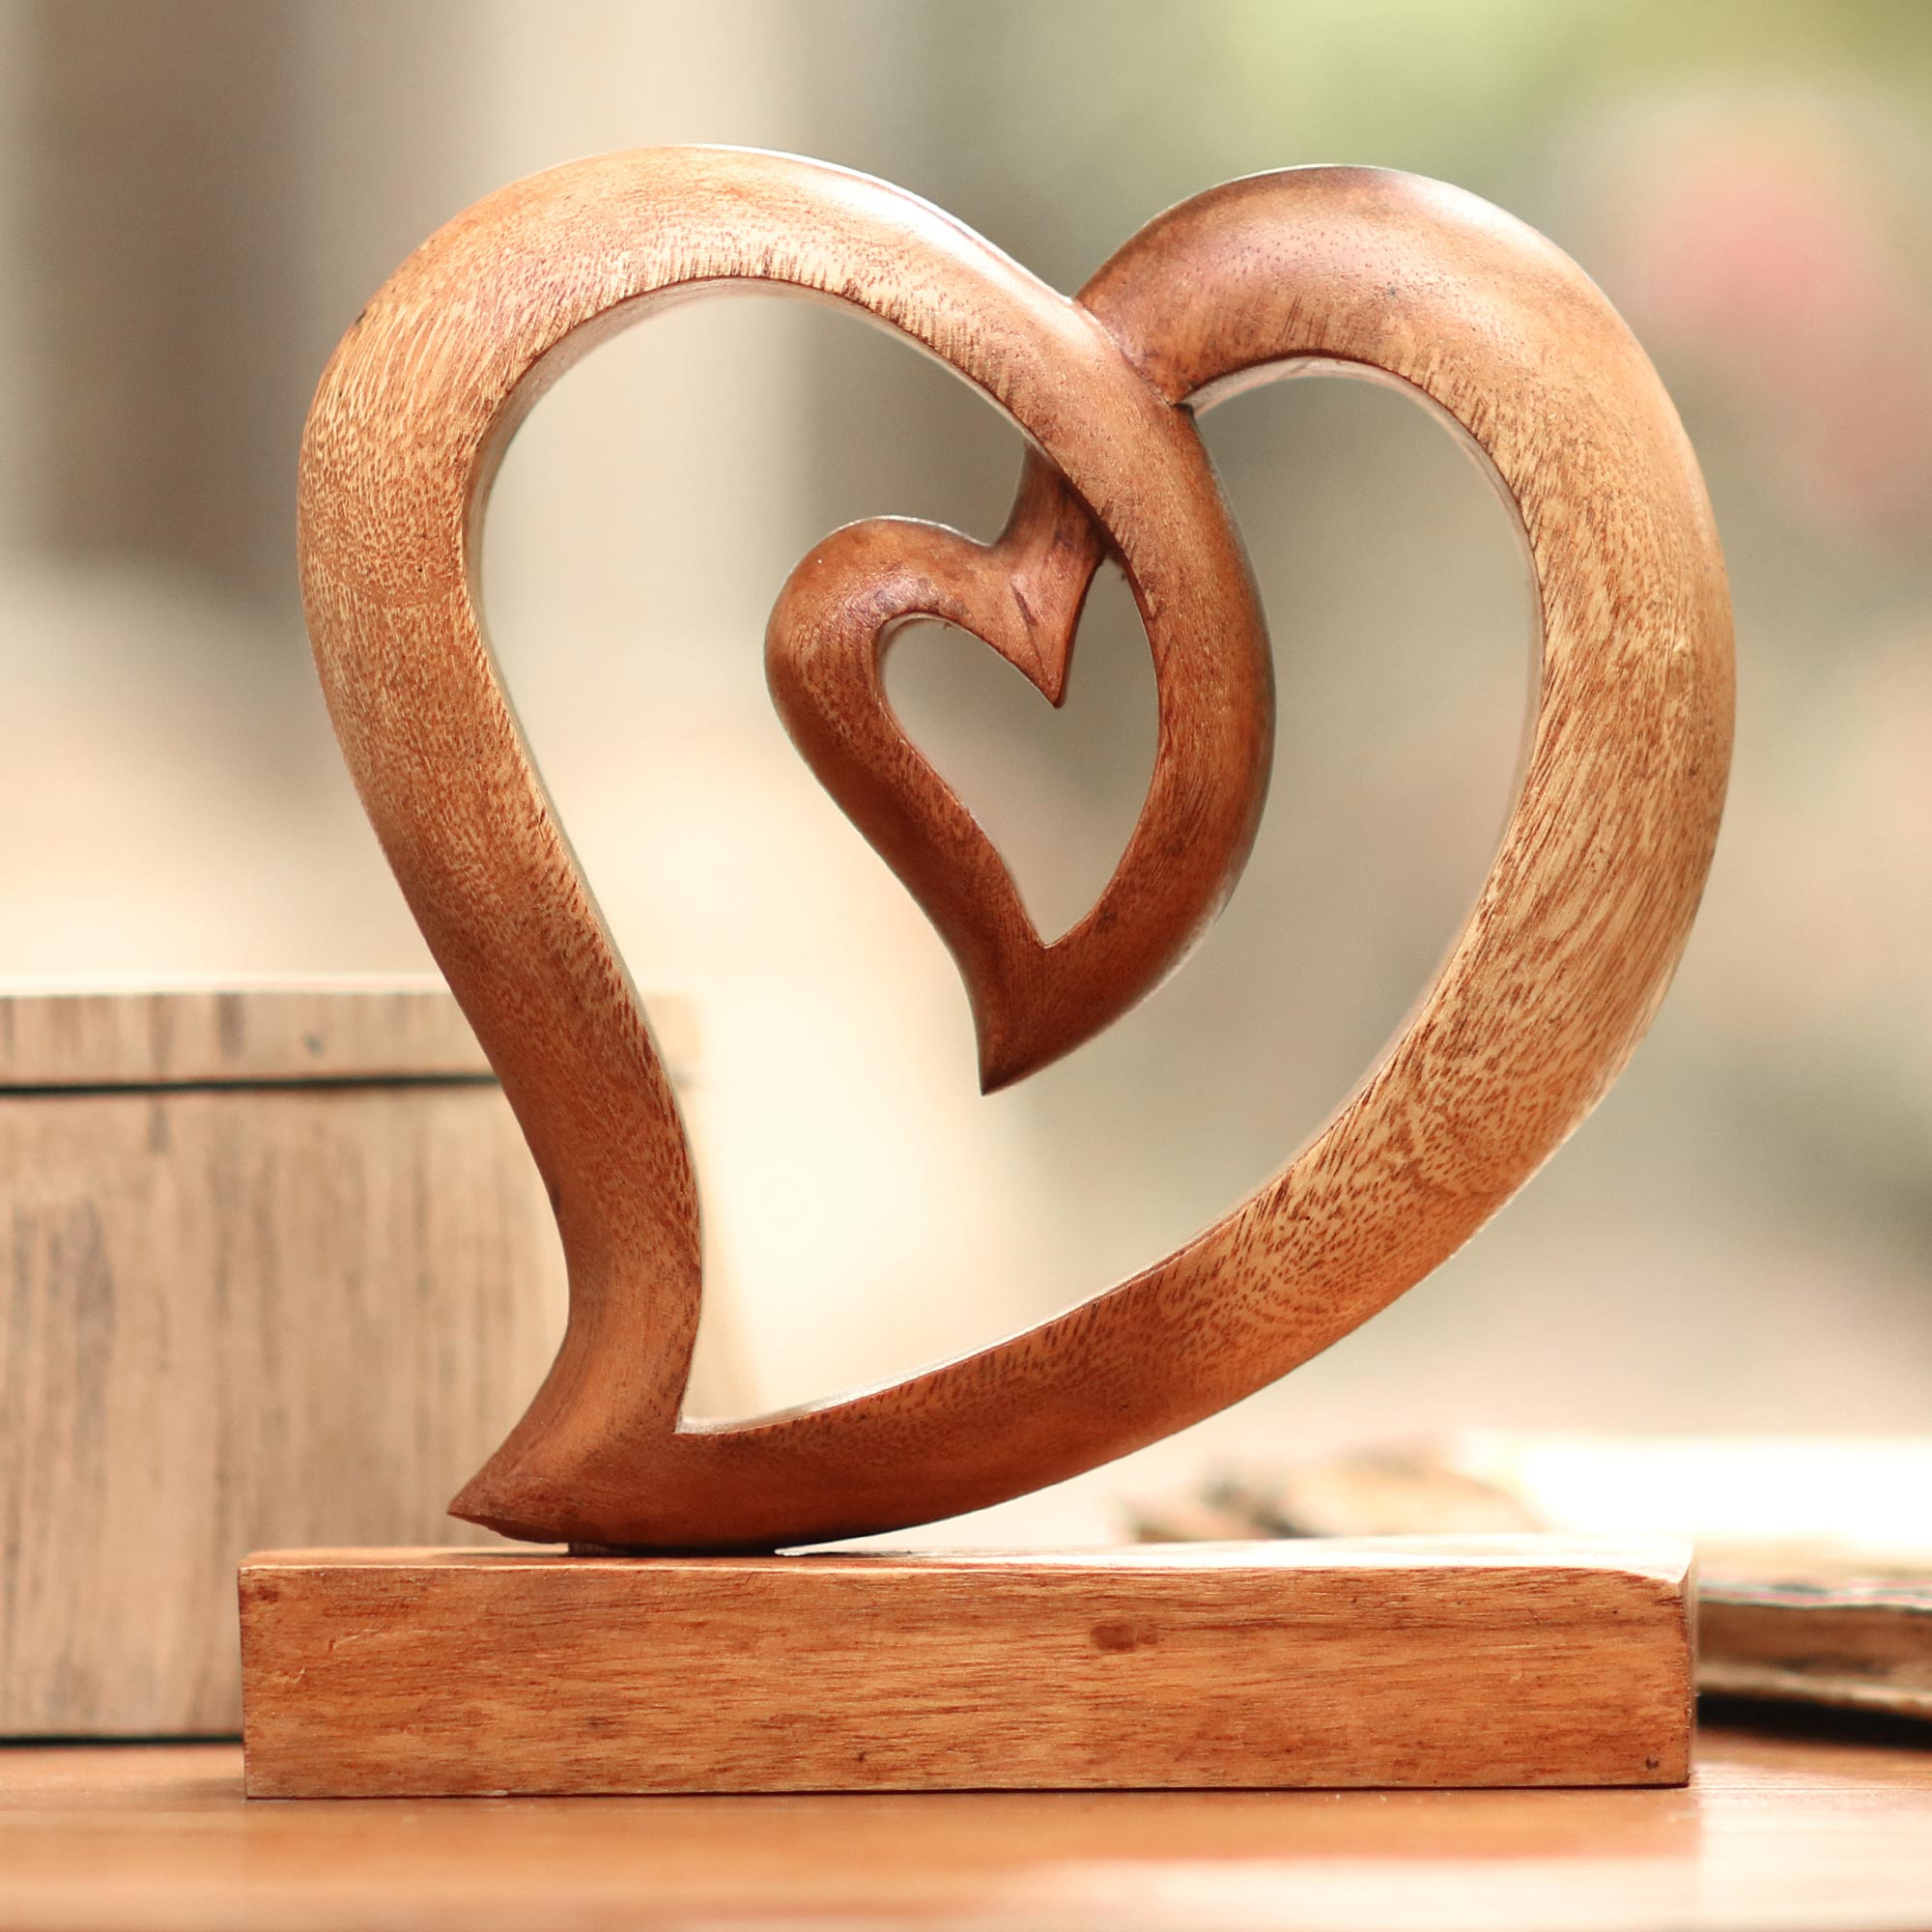 Wooden Heart Shape Photo Picture Frame, Wood Carving Love Romantic